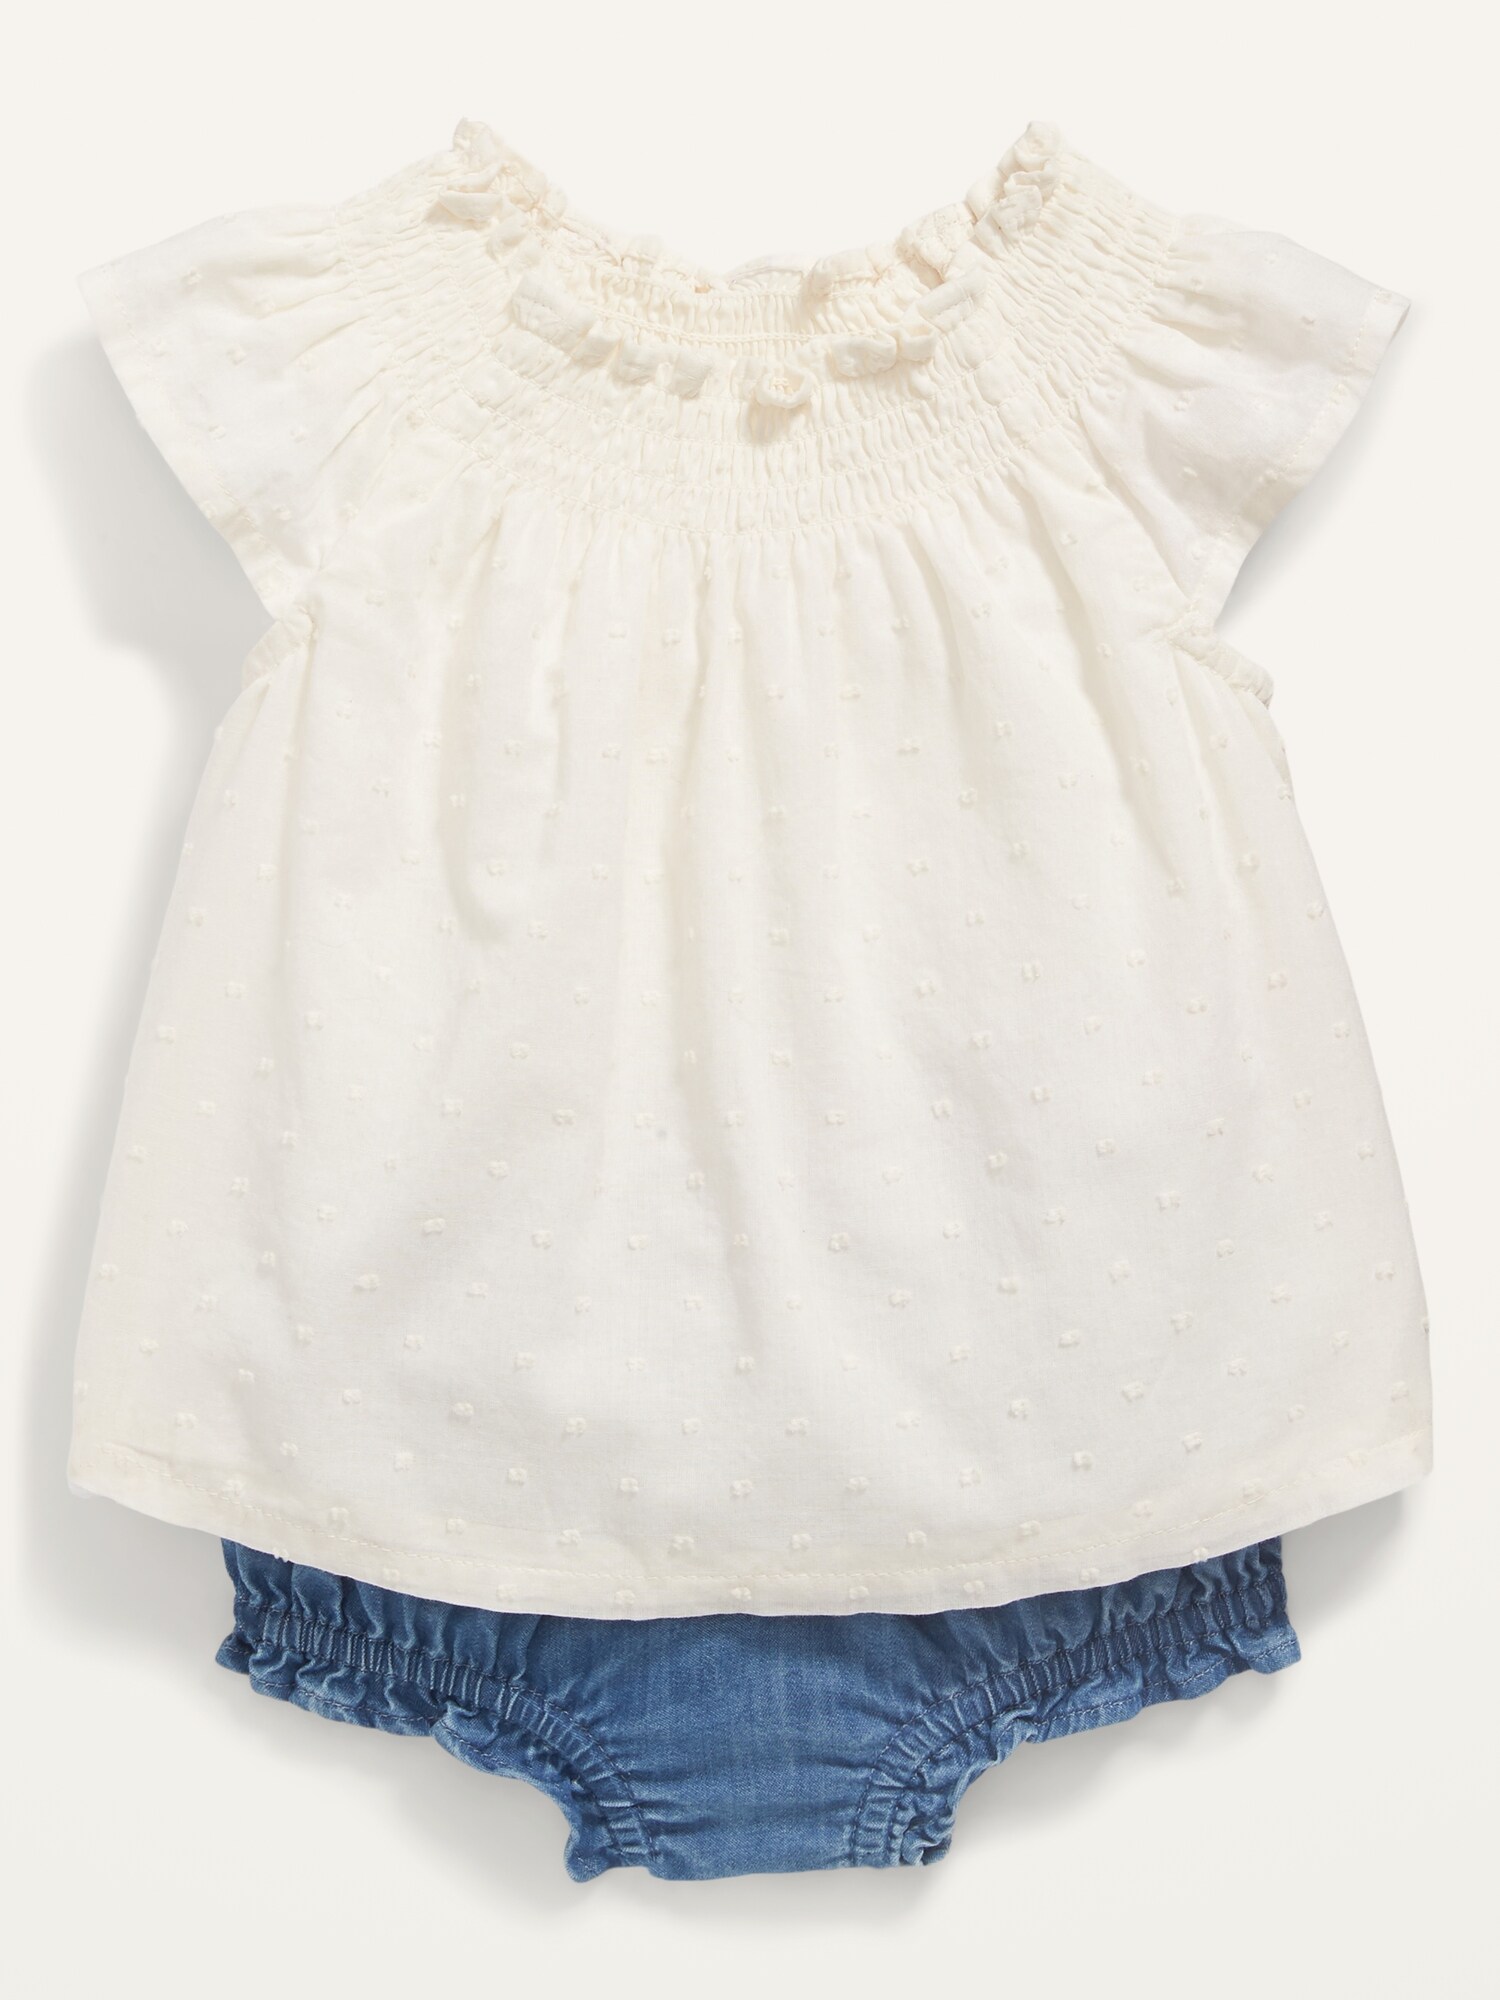 Short-Sleeve Swiss Dot Top and Bloomers Set for Baby